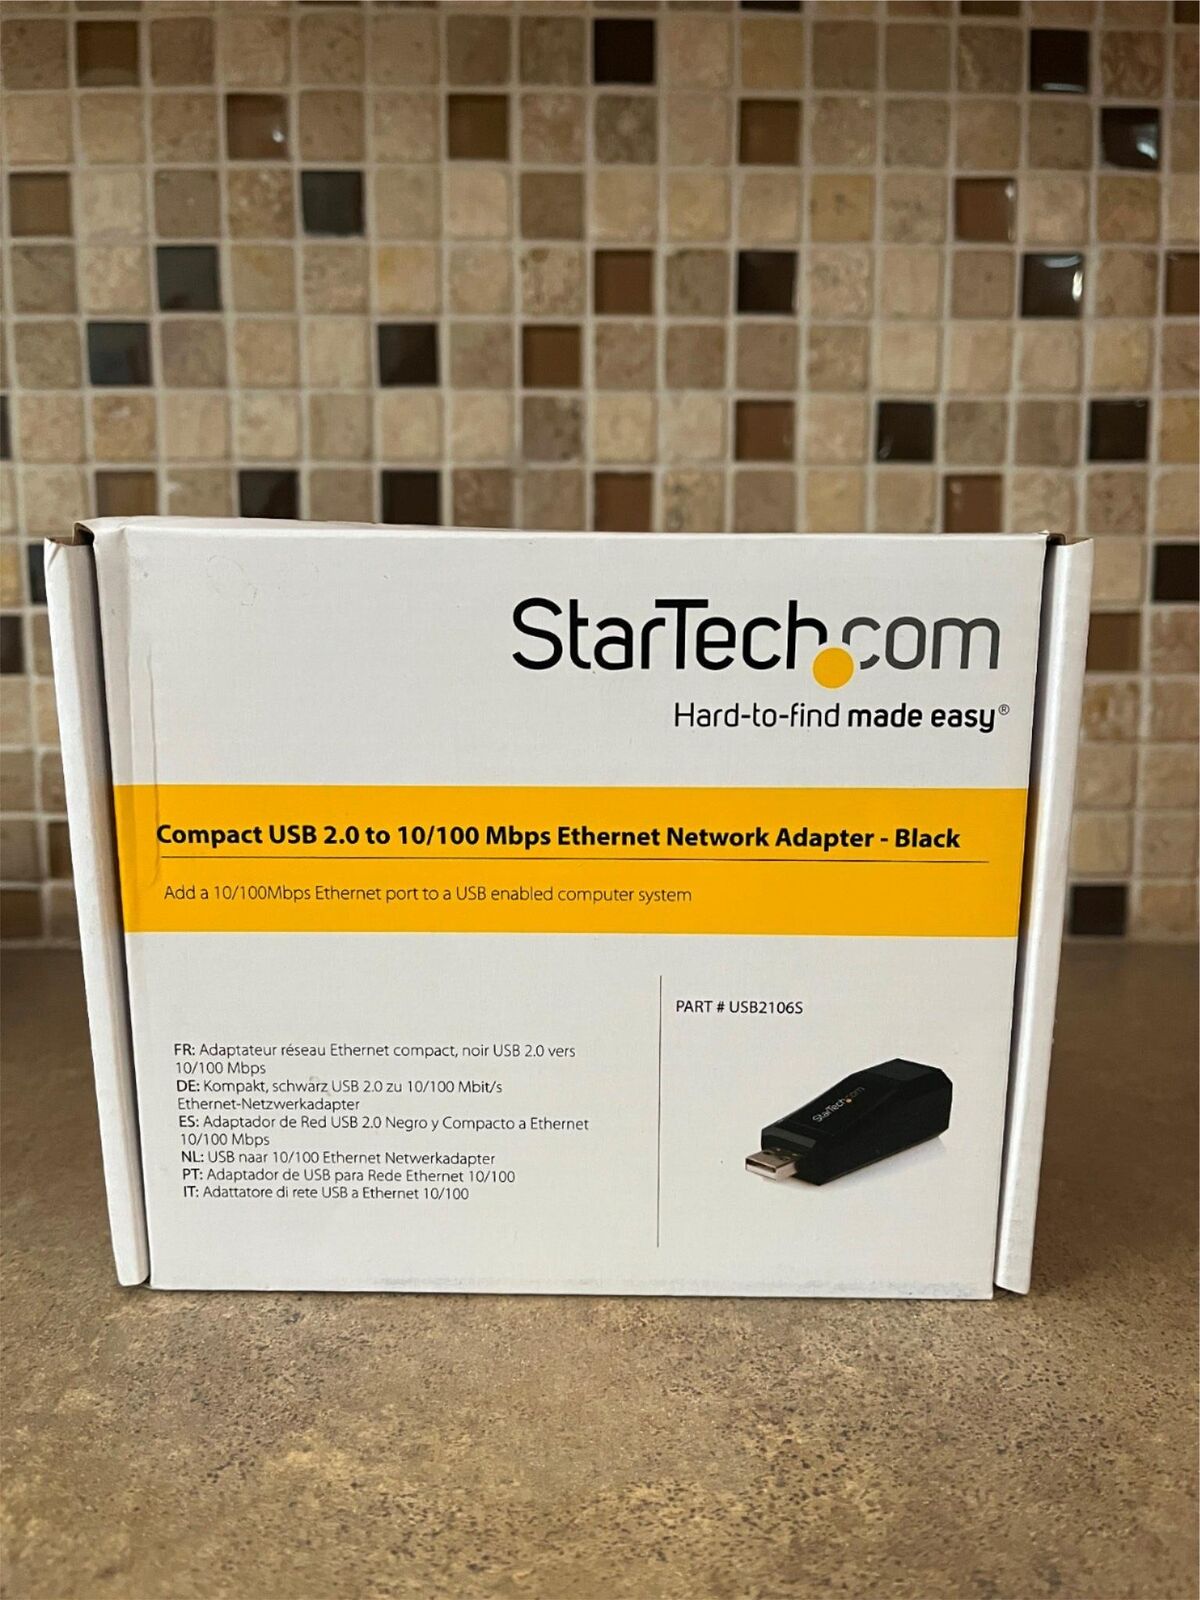 USB2106S STARTECH COMPACT BLACK USB 2.0 TO 10/100 MBPS ETHERNET NETWORK B4-2